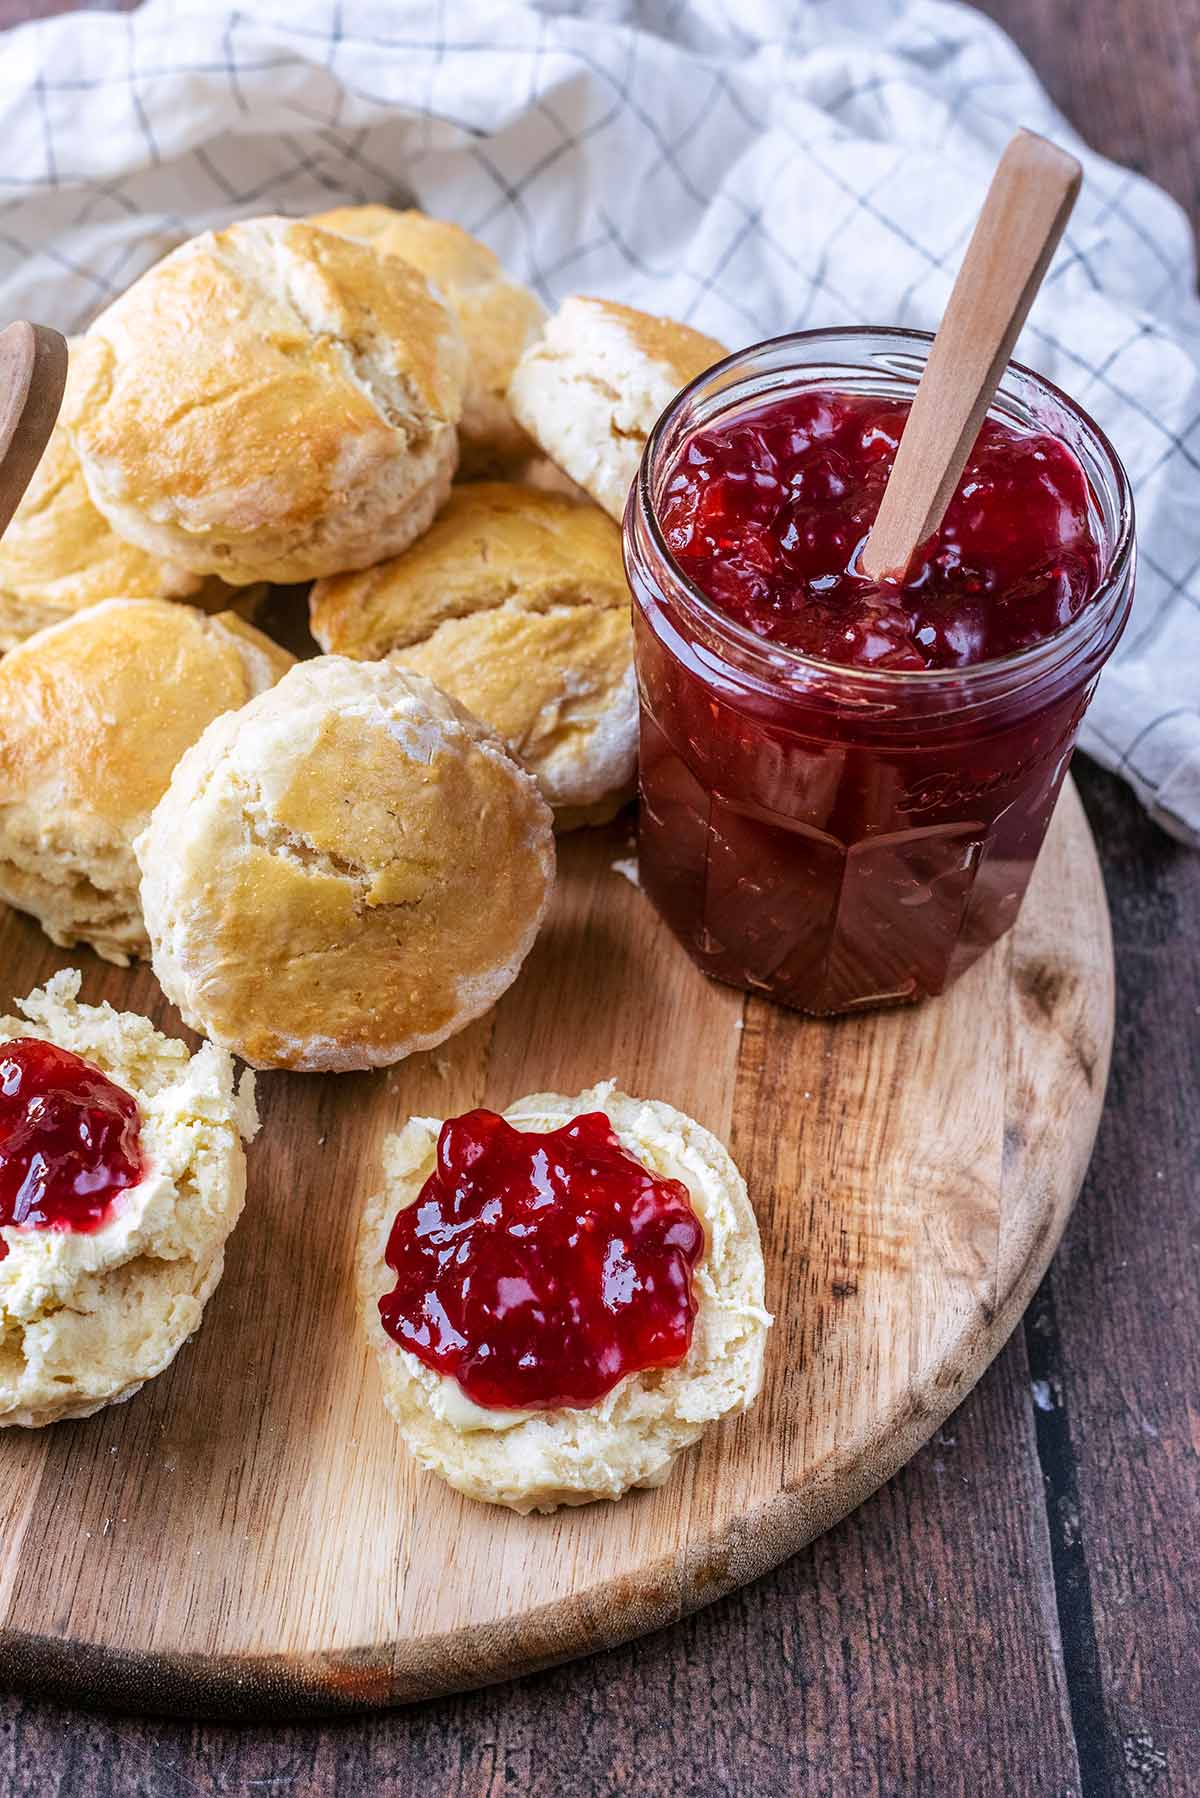 Scones on a board next to a jar of jam.